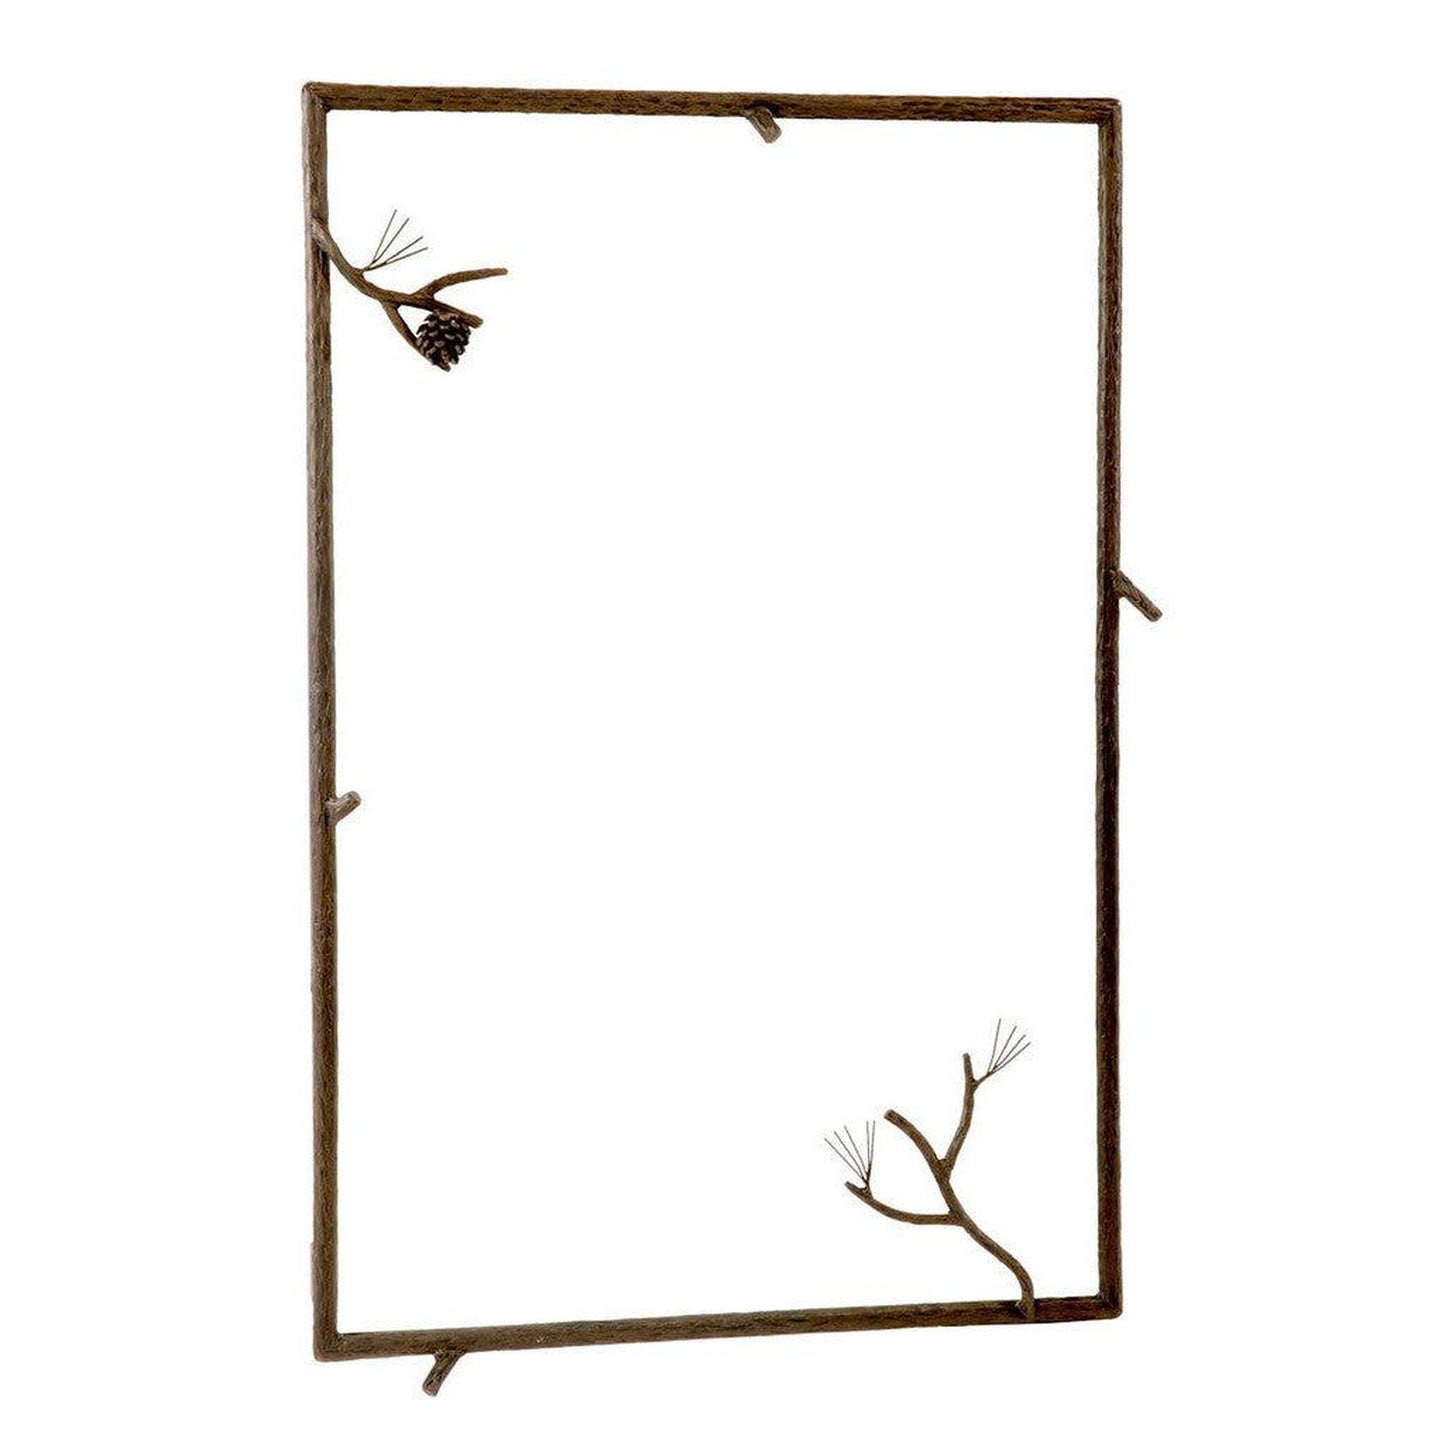 Stone County Ironworks Pine 37" x 25" Large Hand Rubbed Bronze Iron Wall Mirror With Pewter Iron Accent